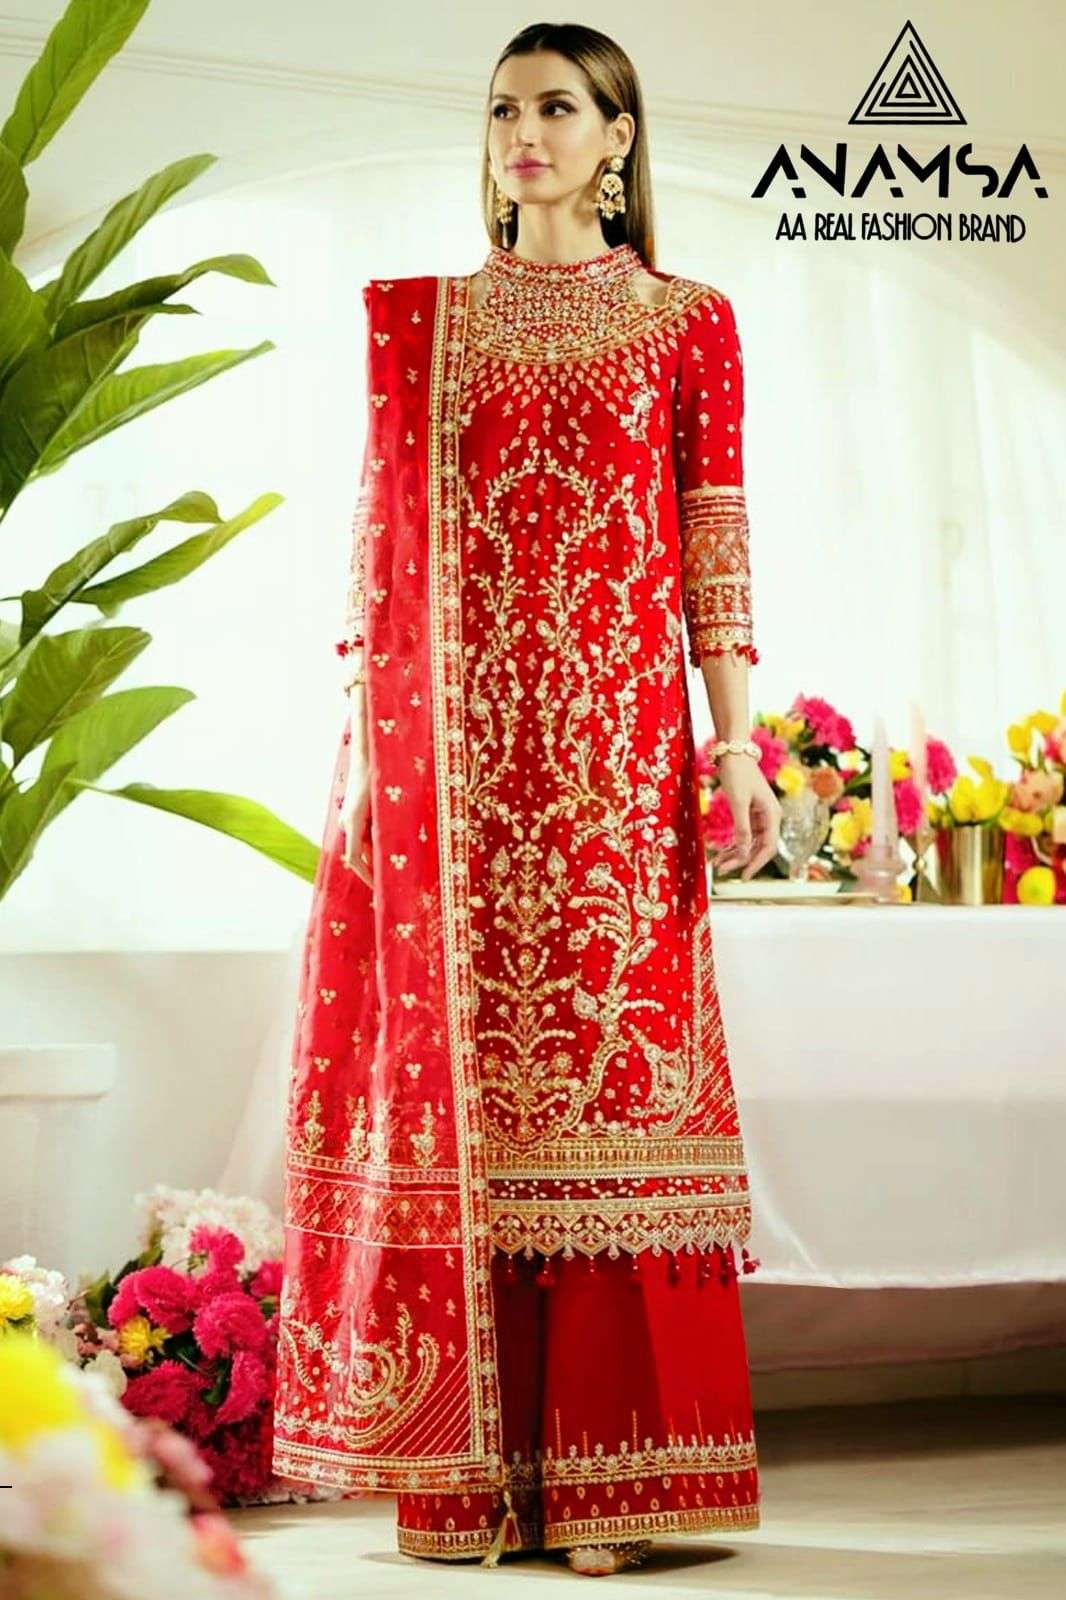 Anamsa 283 Georgette with embroidery work Red color Designer...